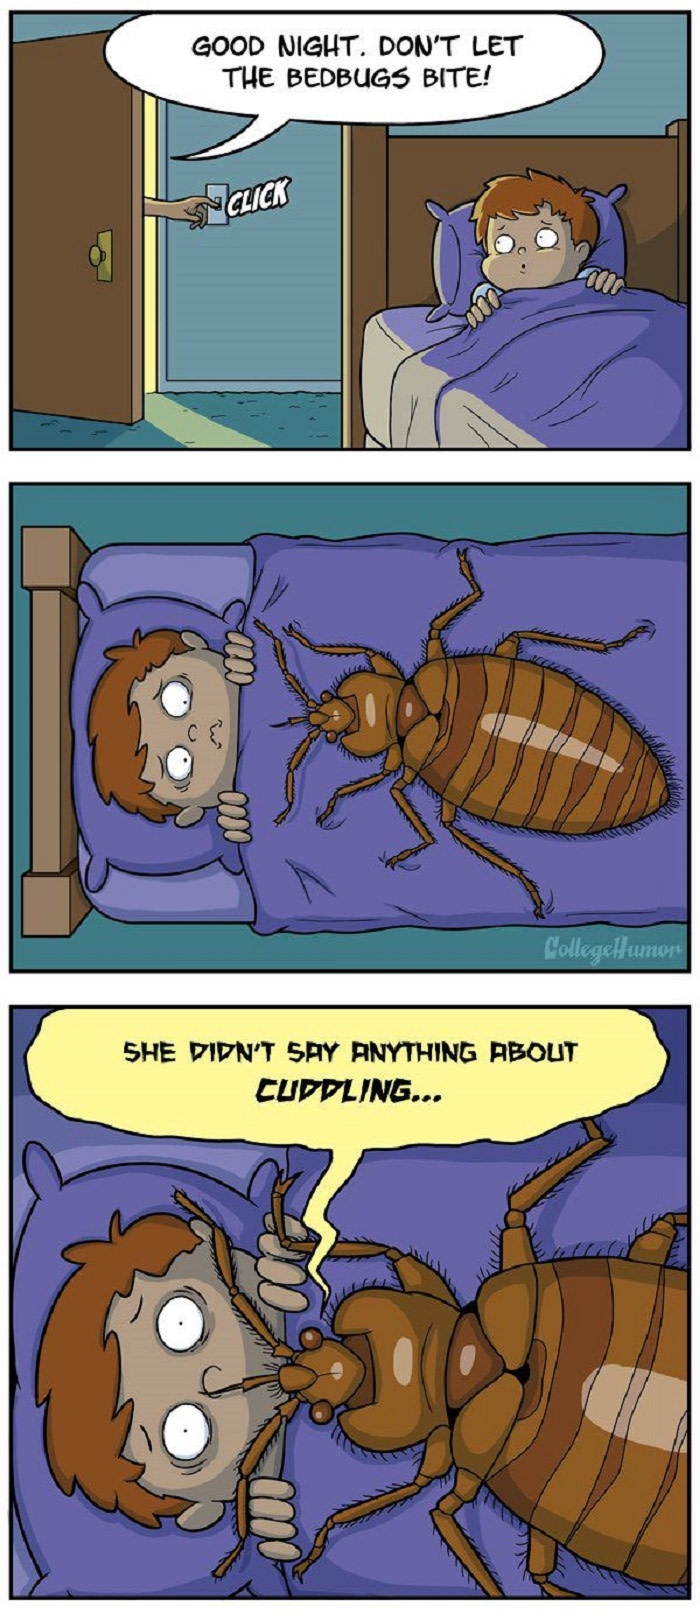 Don't let bed bugs bite